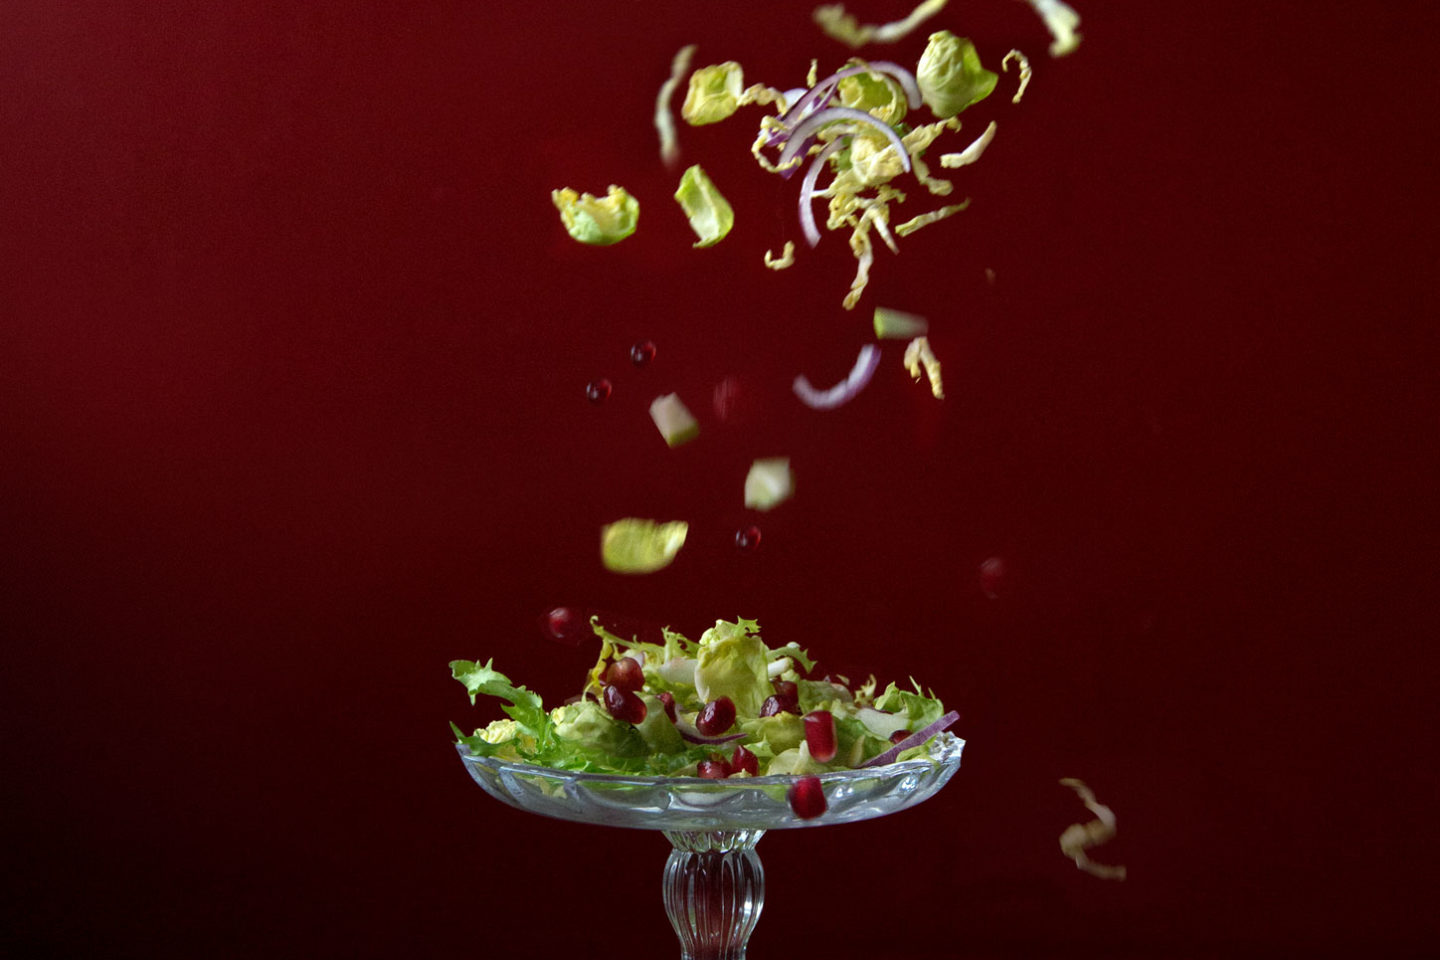 Salad leaves being dropped onto a dish